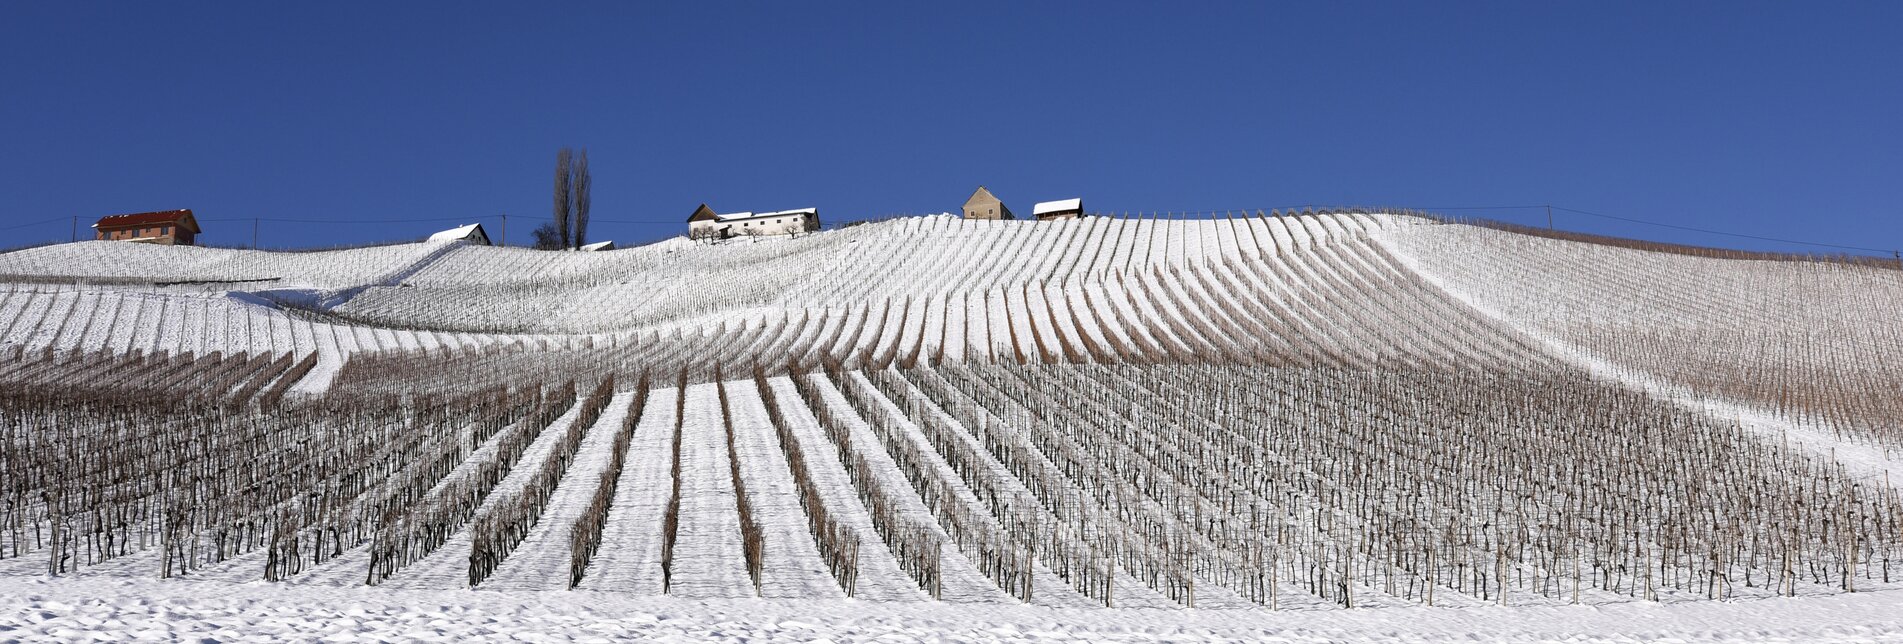 Southstyrian wine country in winter | © Steiermark Tourismus | Gery Wolf